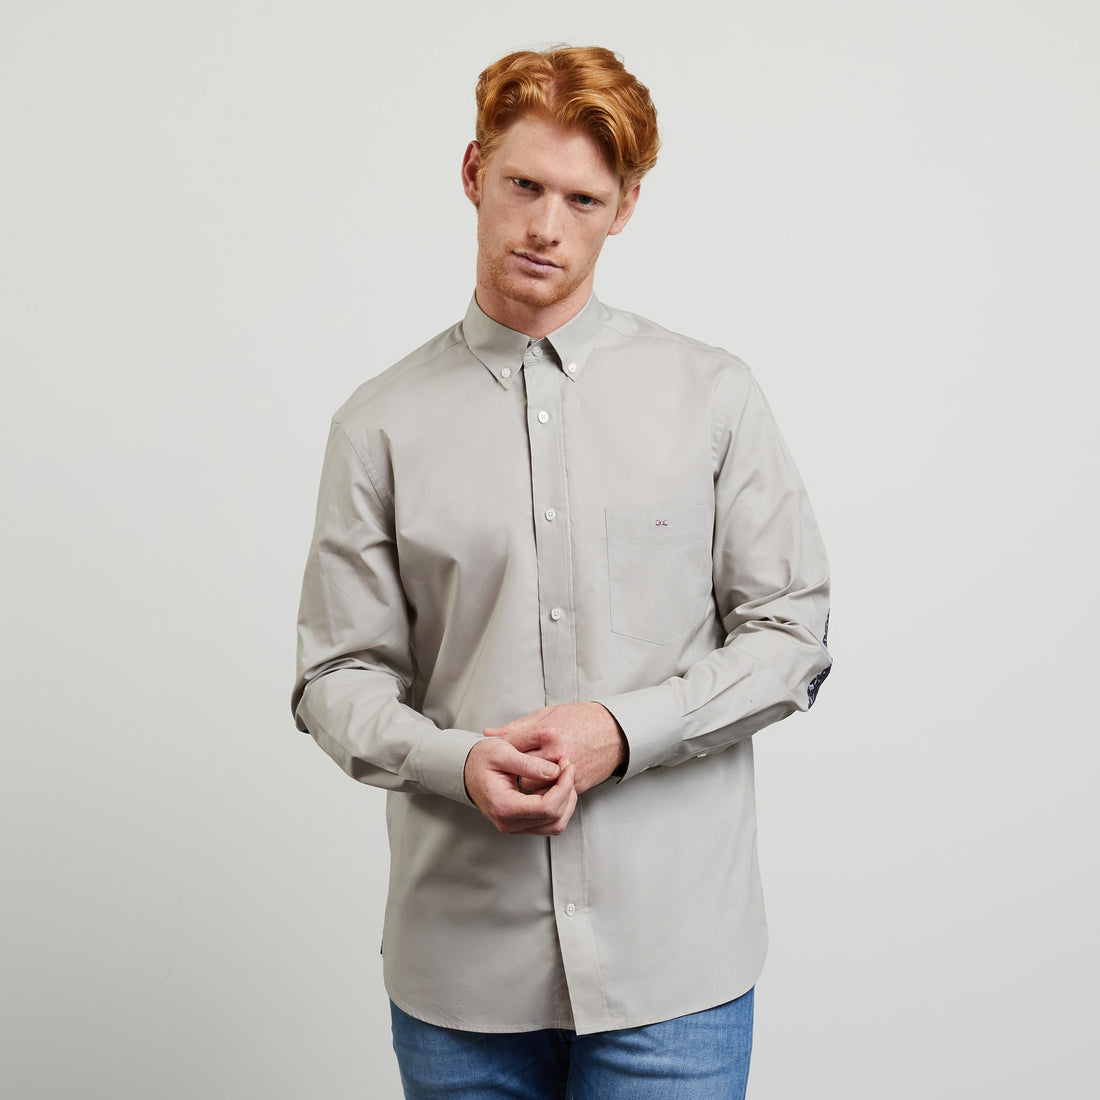 Grey Shirt With Decorative Elbow Patches - 02